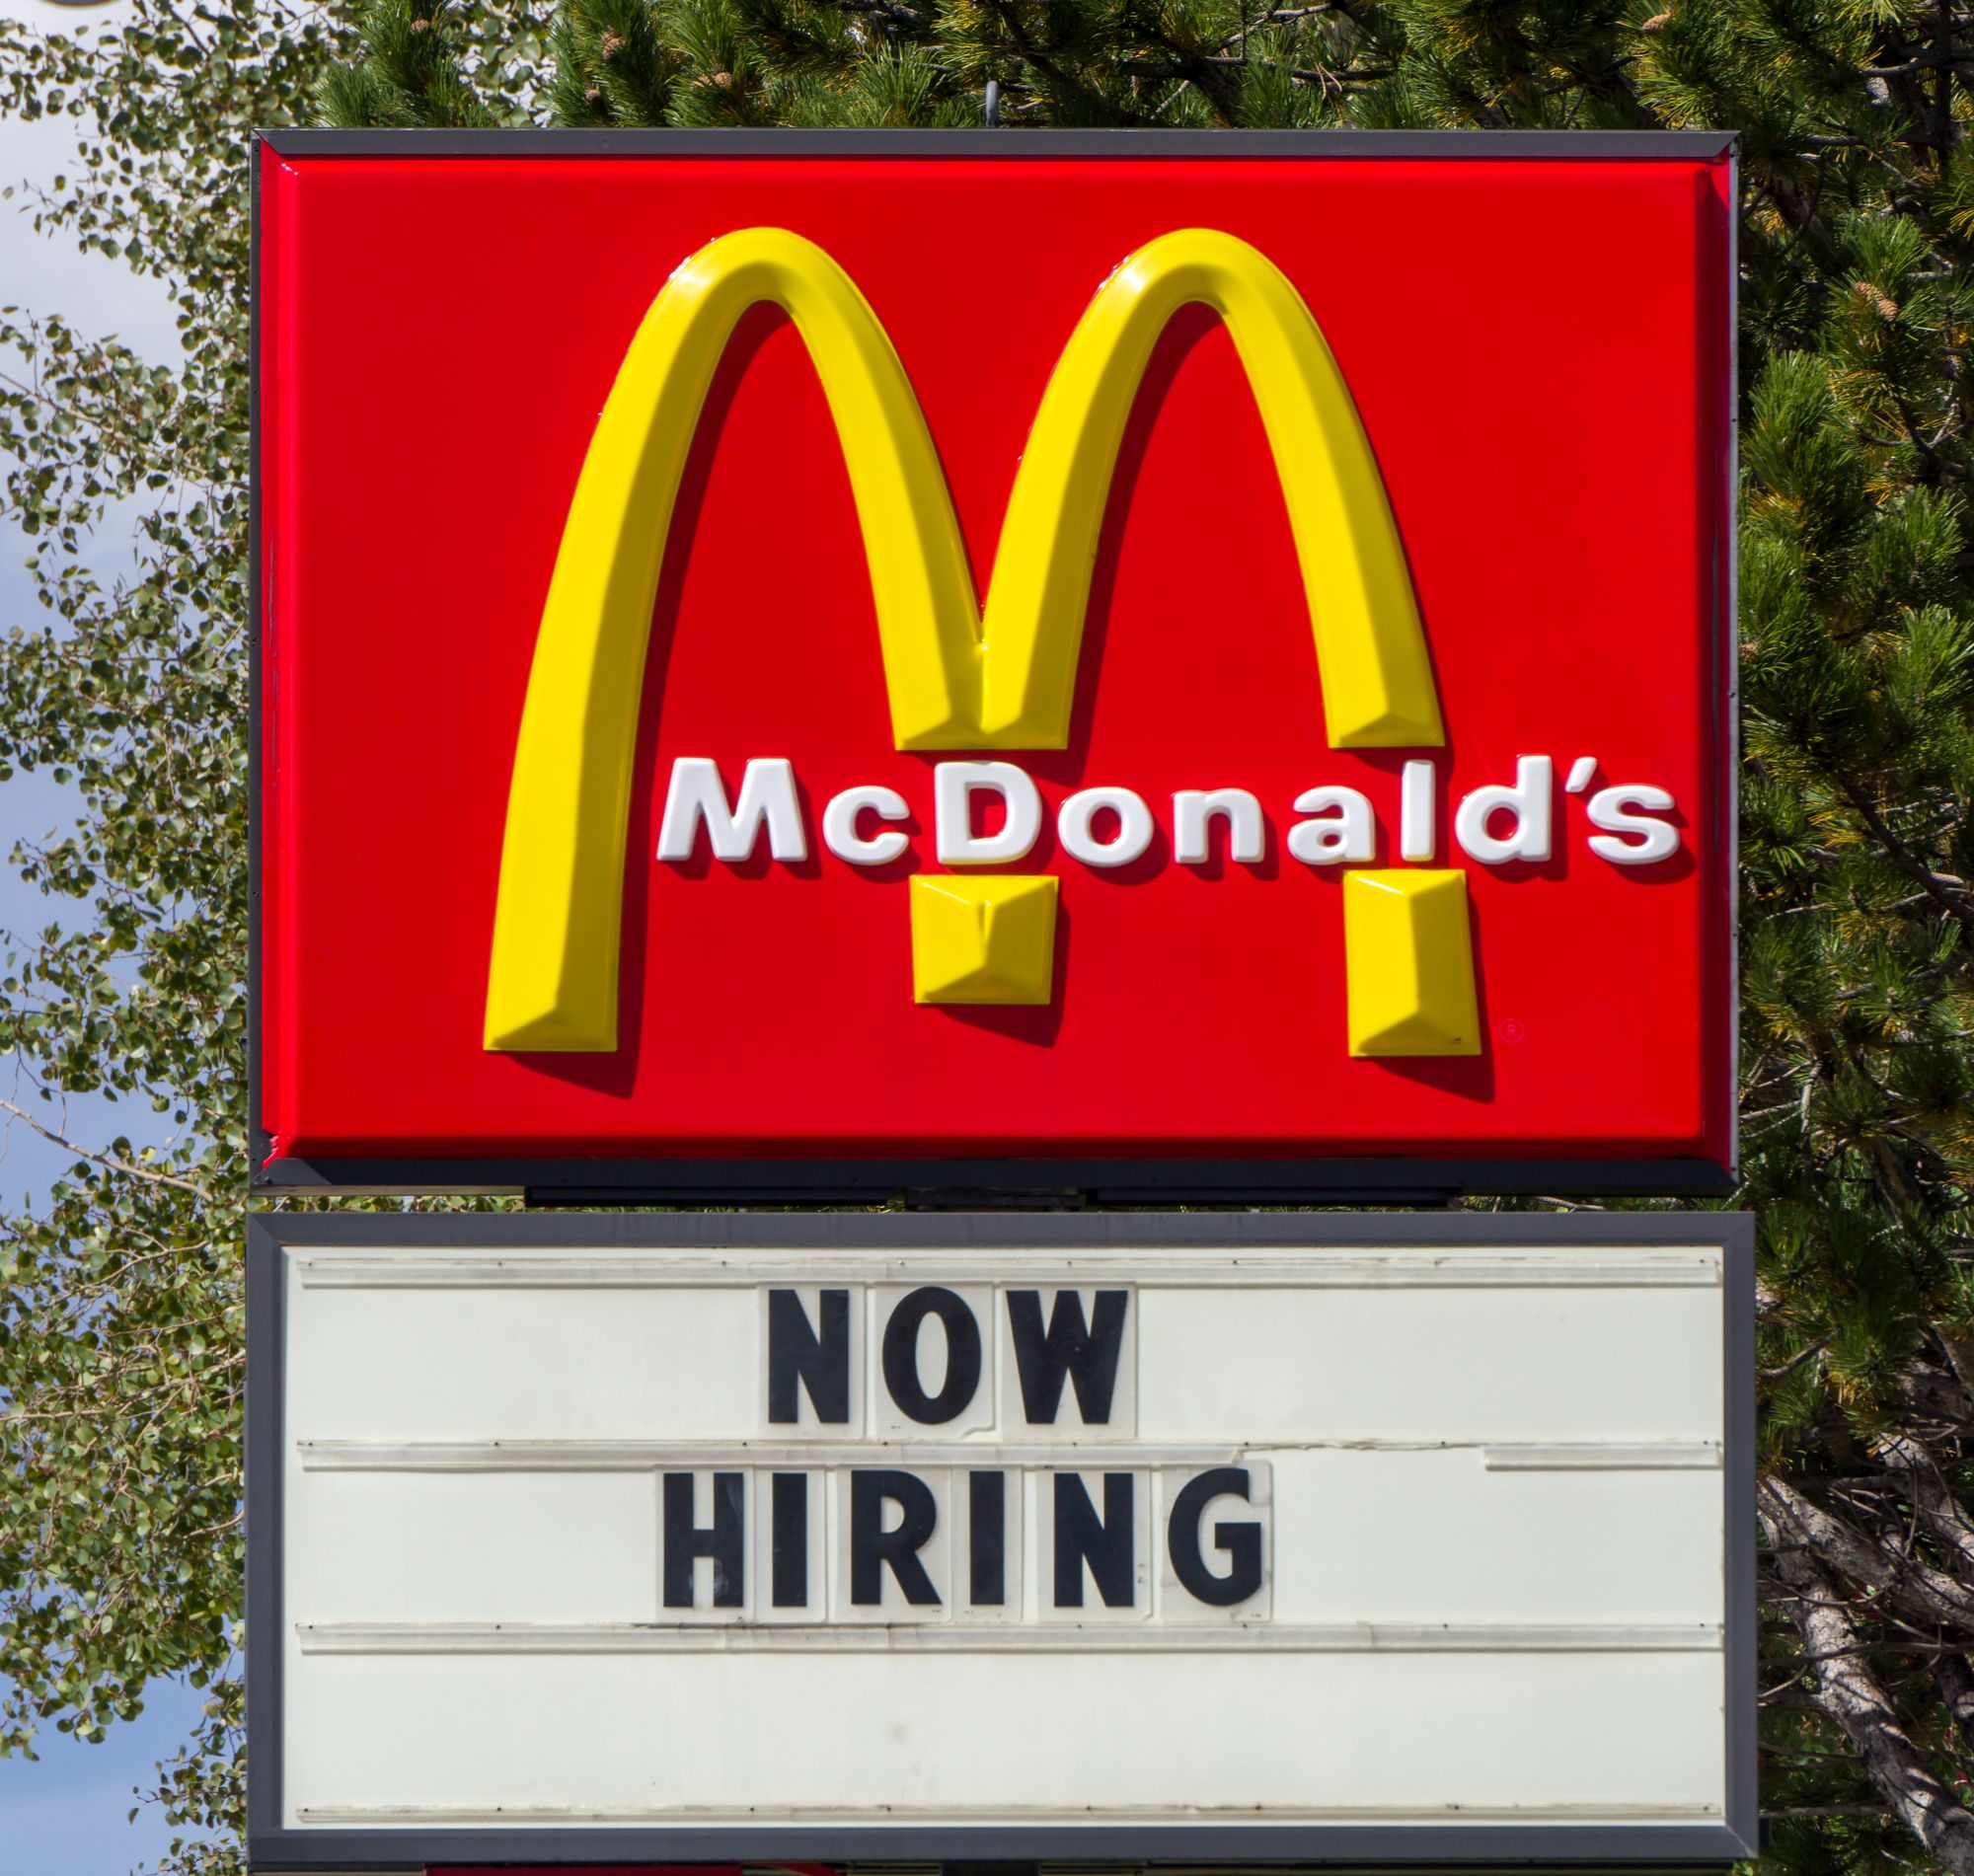 EVANSTON, WY/USA - OCTOBER 2, 2016: Now hiring sign at McDonald's restaurant. McDonald's is a world wide fast food company.